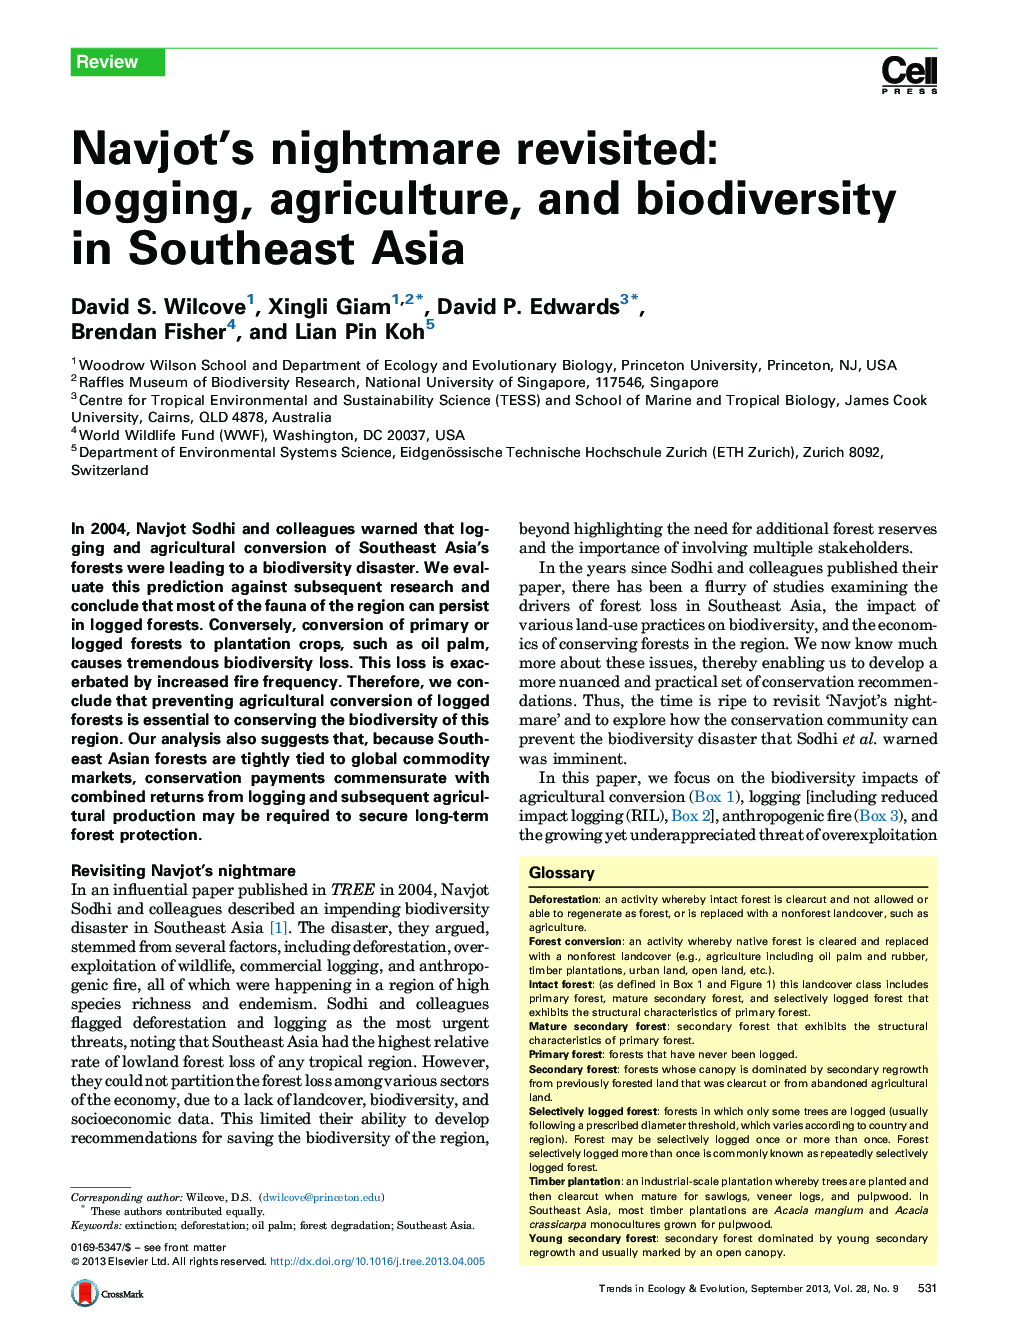 Navjot's nightmare revisited: logging, agriculture, and biodiversity in Southeast Asia